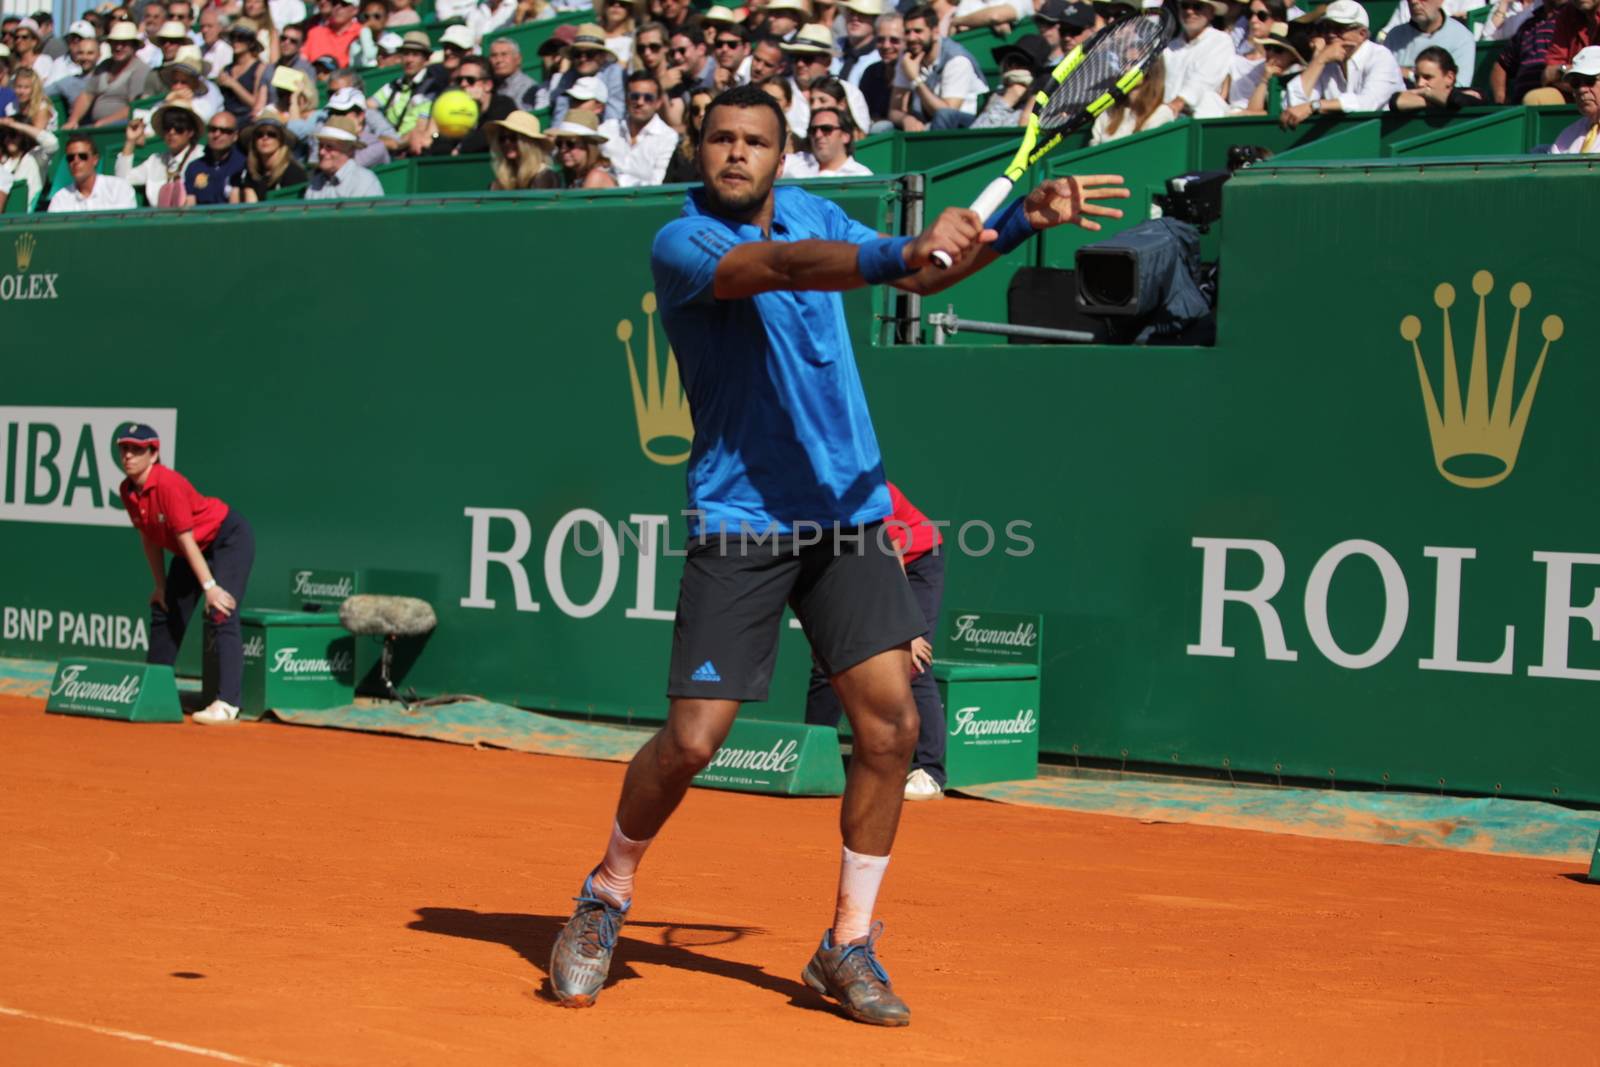 MONACA, Monte-Carlo: France's Jo-Wilfried Tsonga hits a return to Switzerland's Roger Federer during their tennis match at the Monte-Carlo ATP Masters Series tournament on April 15, 2016 in Monaco. France's Jo-Wilfried Tsonga is through to the Monte Carlo Masters semi-finals following a win over Switzerland's Roger Federer.